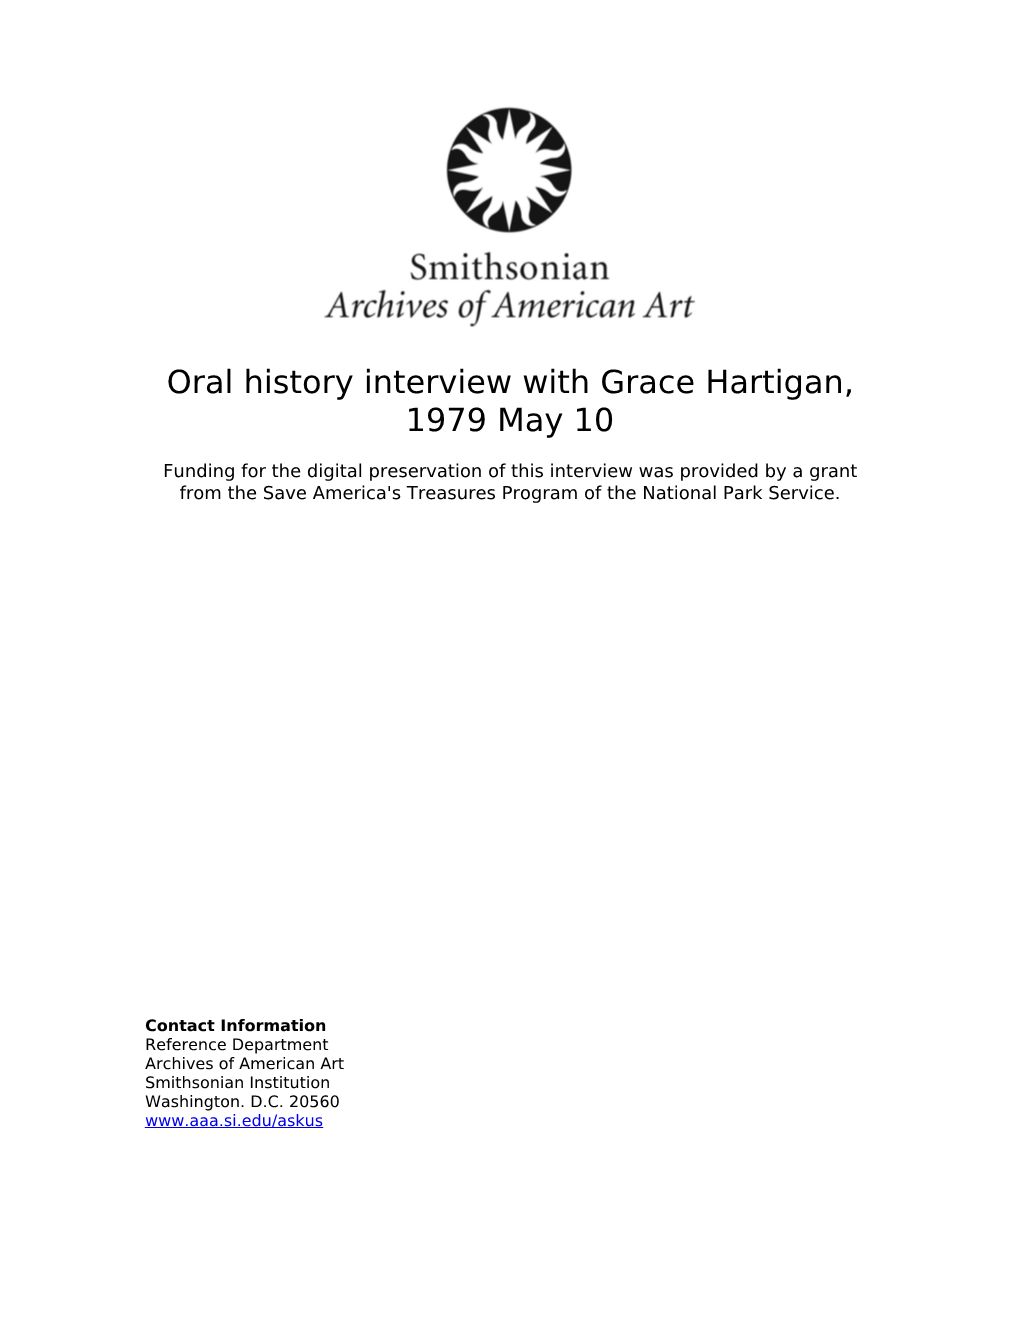 Oral History Interview with Grace Hartigan, 1979 May 10